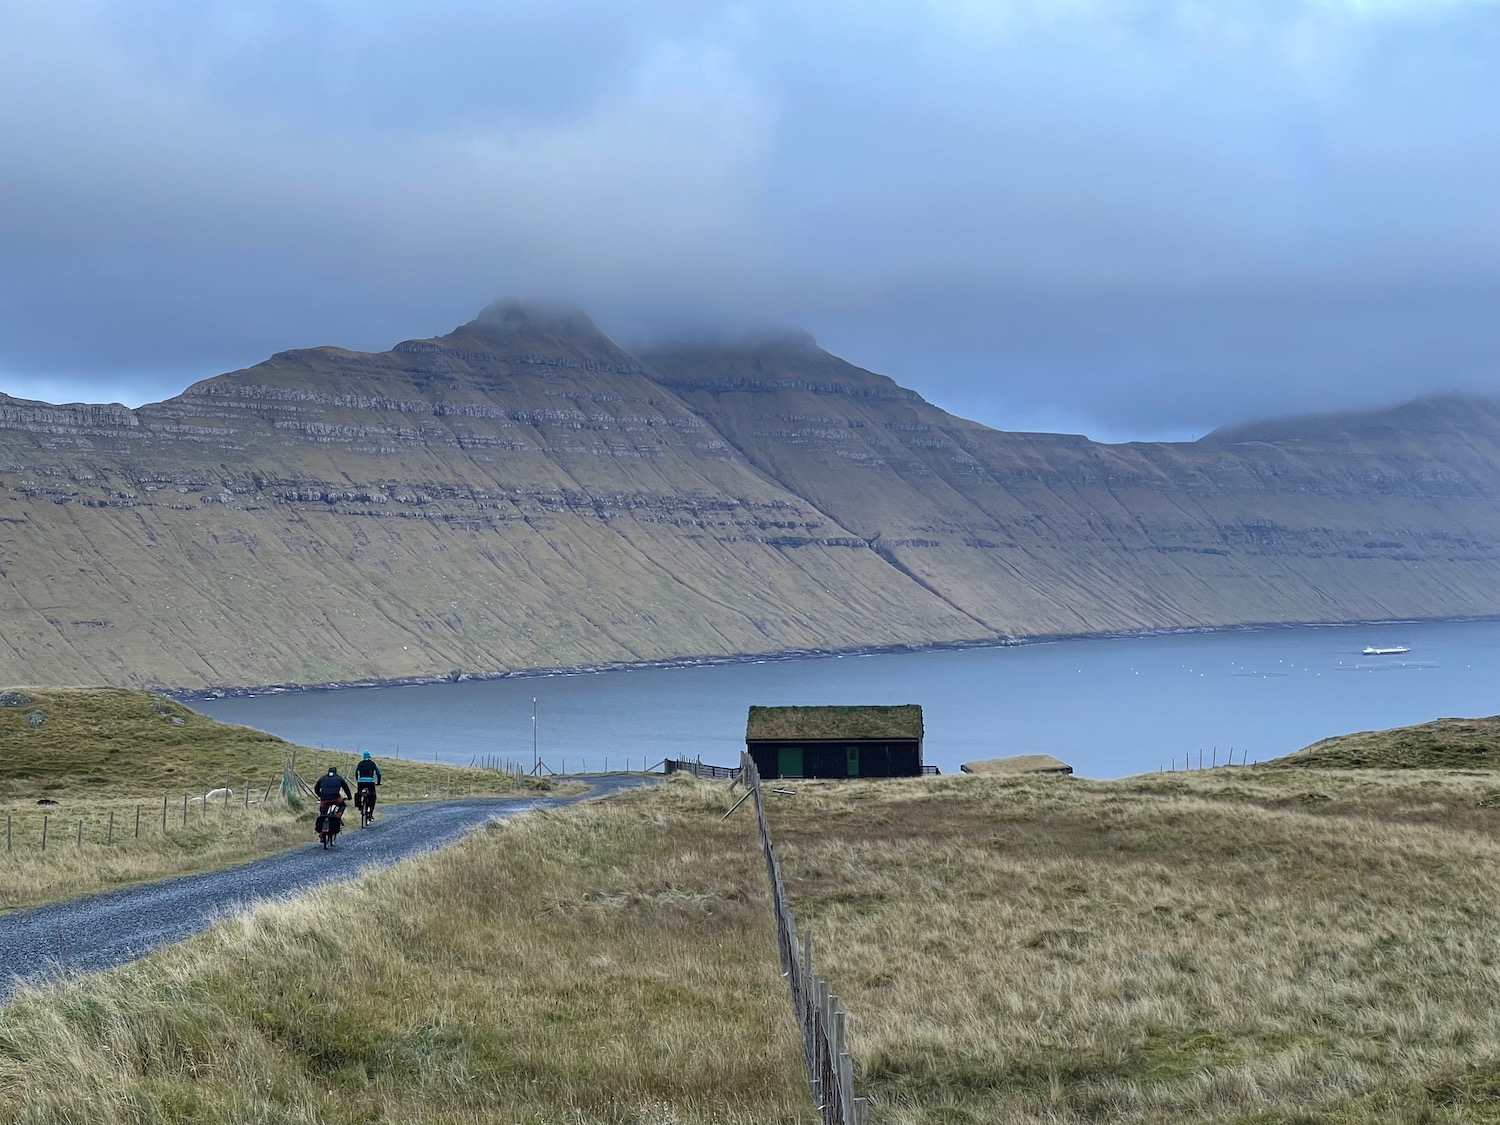 people riding bikes on a road near a body of water